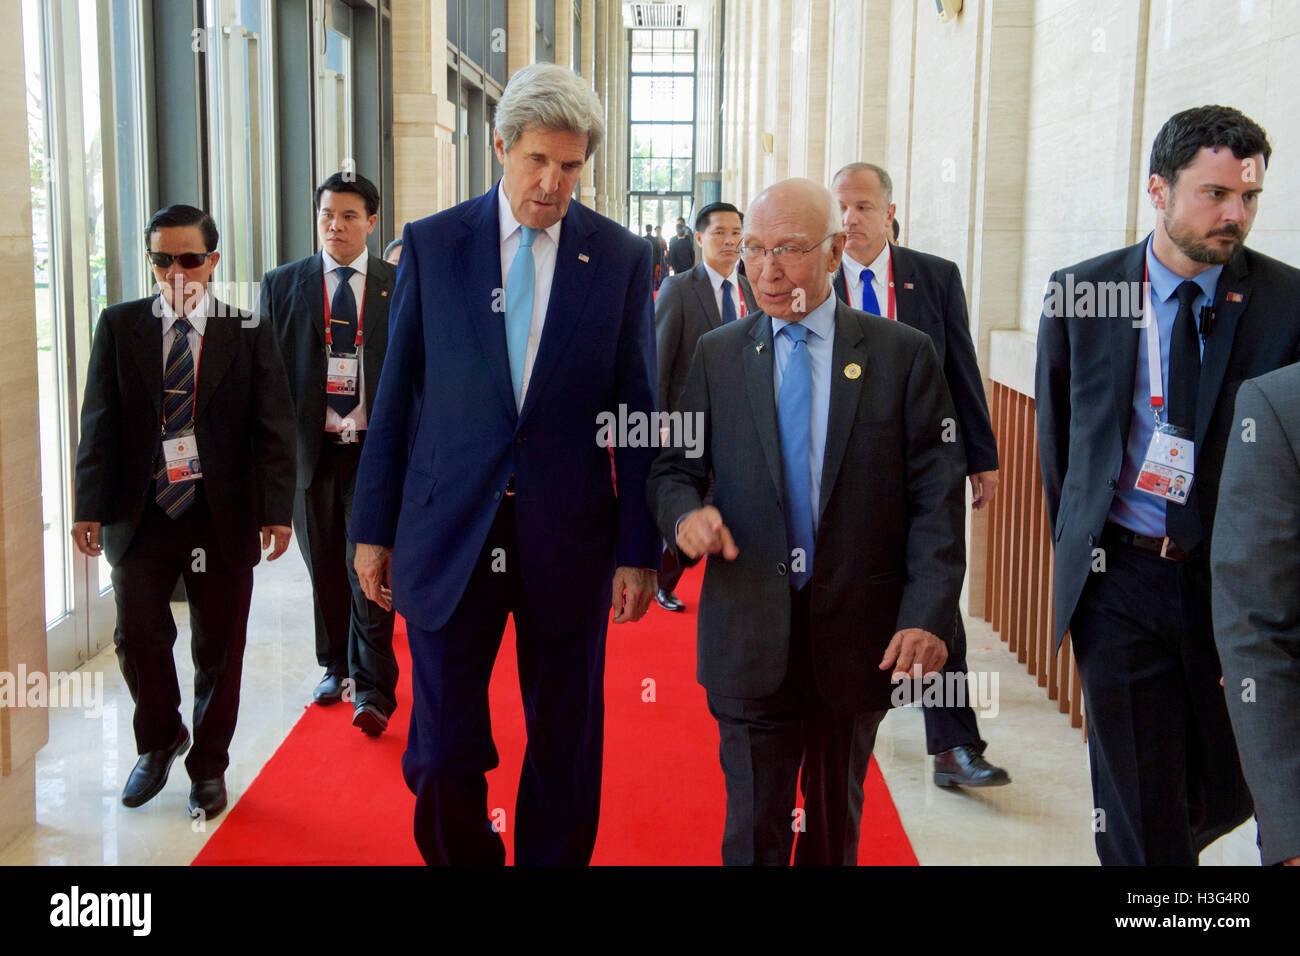 U.S. Secretary of State John Kerry walks with Pakistan Foreign Minister Sartaj Aziz at the National Convention Center in Vientiane, Laos, on July 26, 2016, before a meeting of the ASEAN Regional Forum amid the annual meeting of the Association of Southeast Asian Nations (ASEAN). Stock Photo